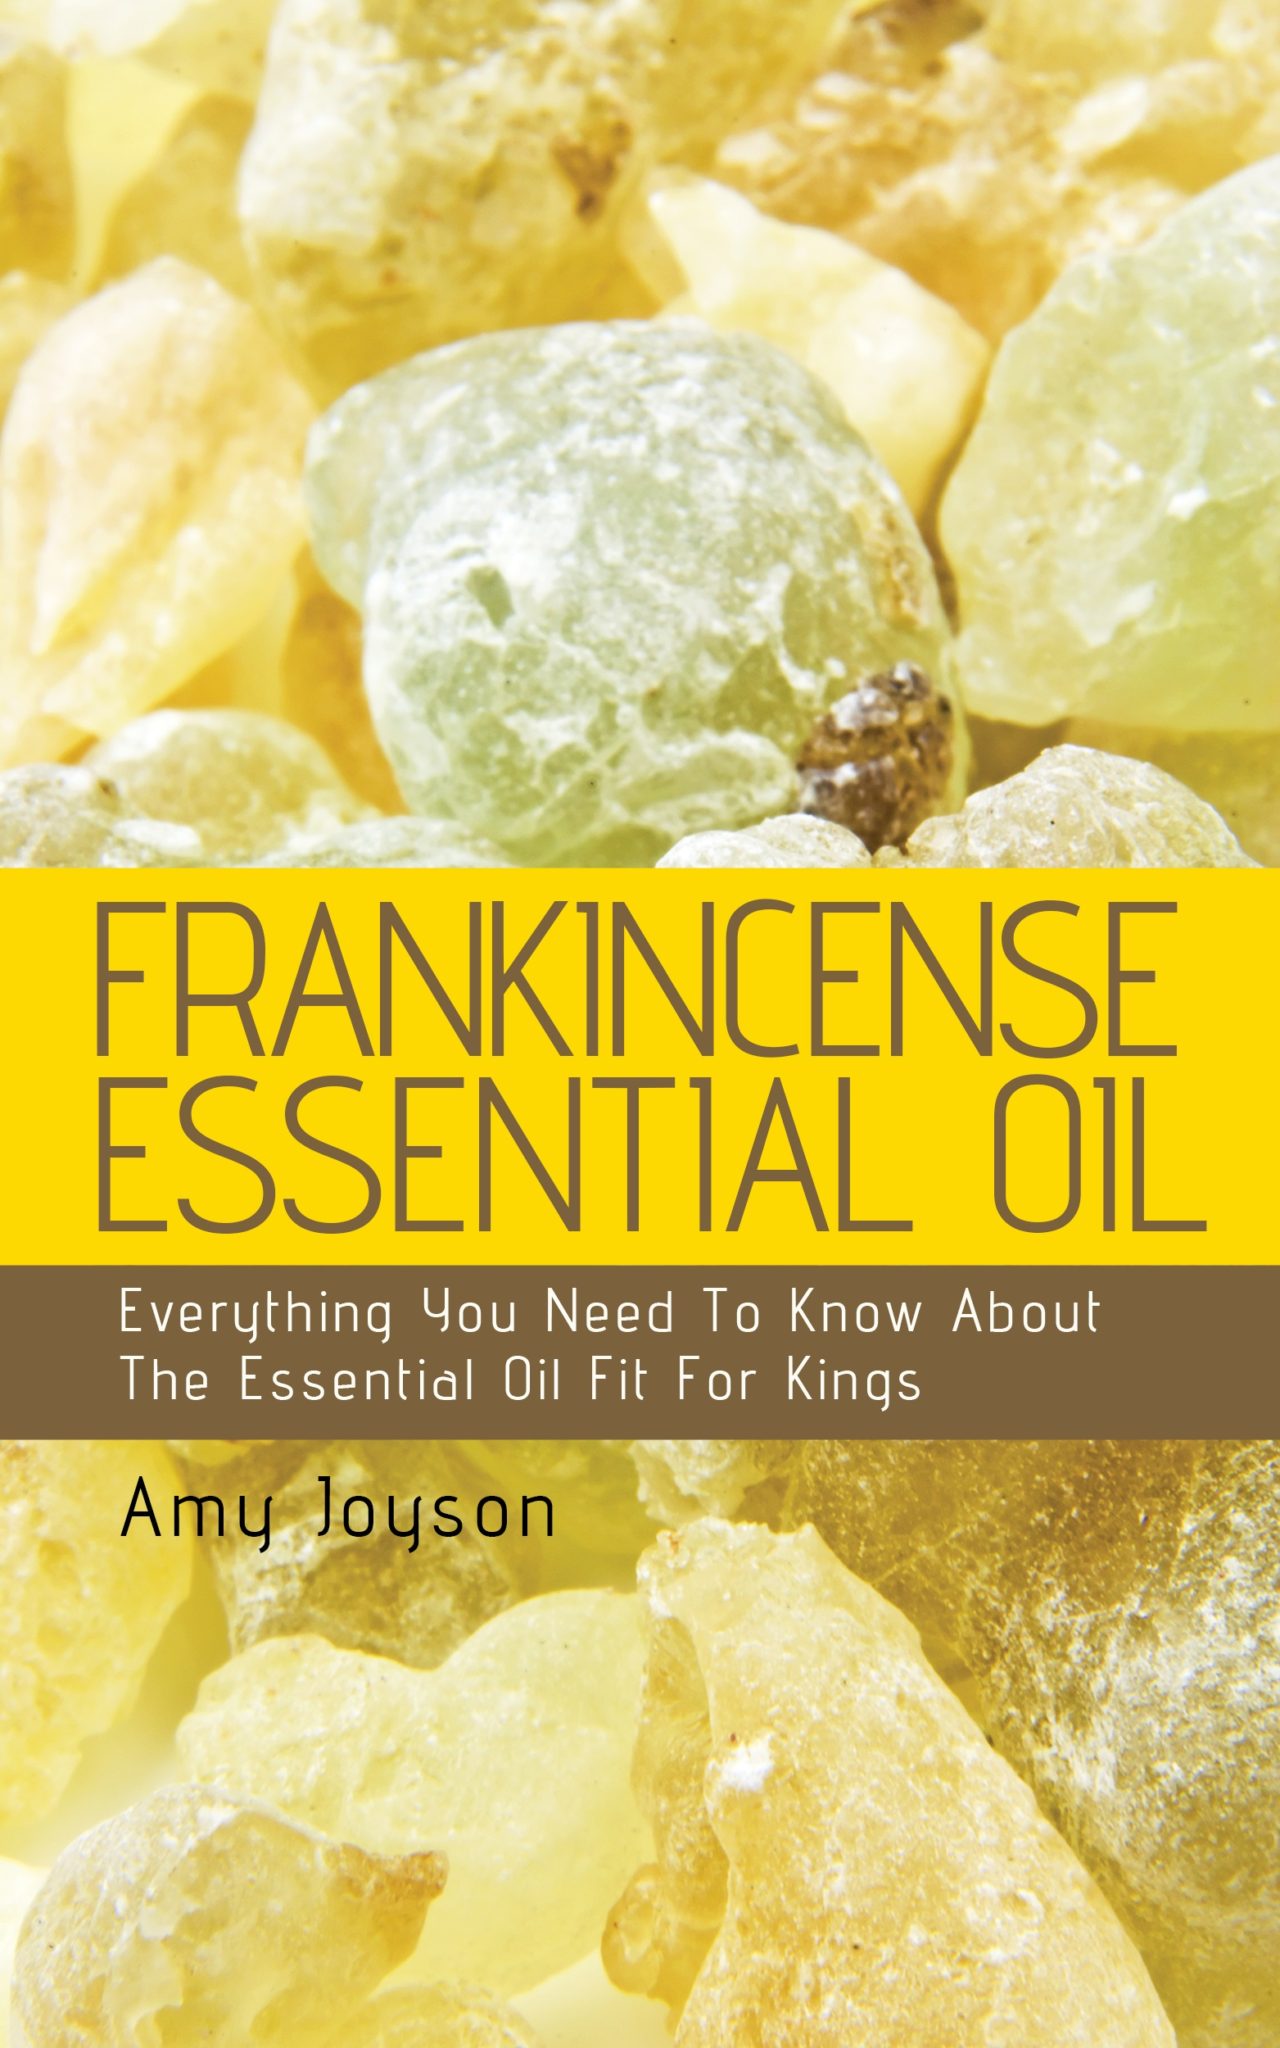 FREE: Frankincense Essential Oil: Everything You Need To Know About The Essential Oil Fit For Kings by Amy Joyson